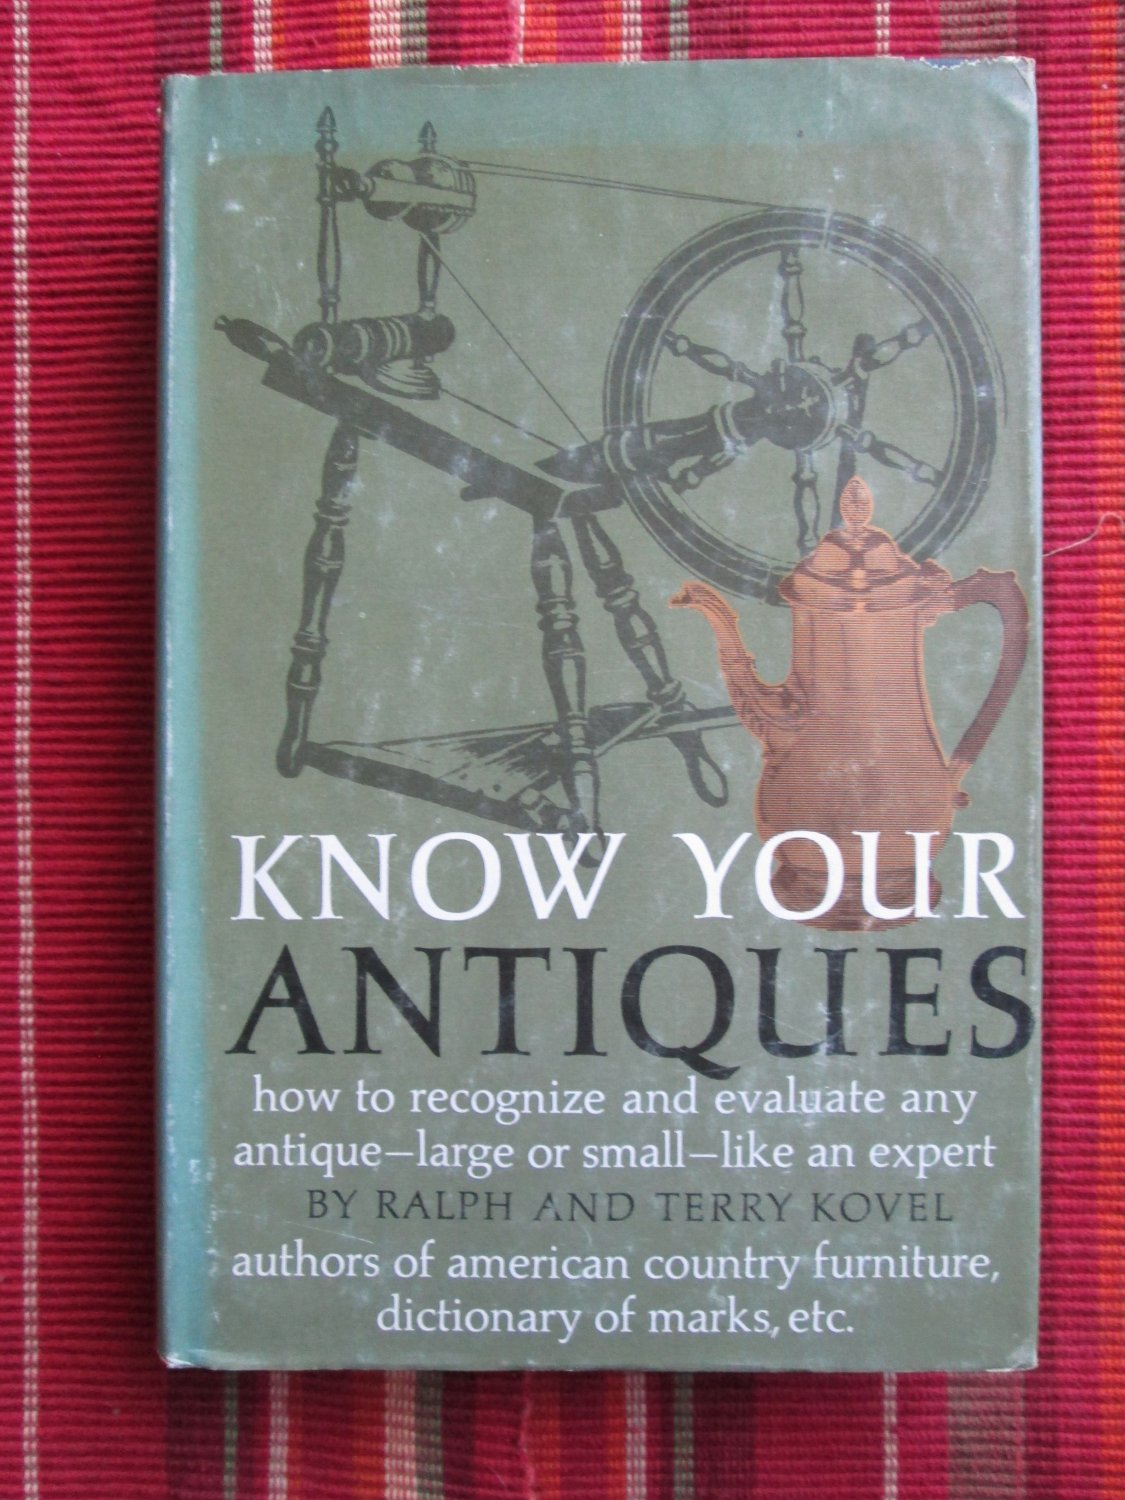 Know Your Antiques by Ralph and Terry Kovel Crown Publishers 1970 Third Printing